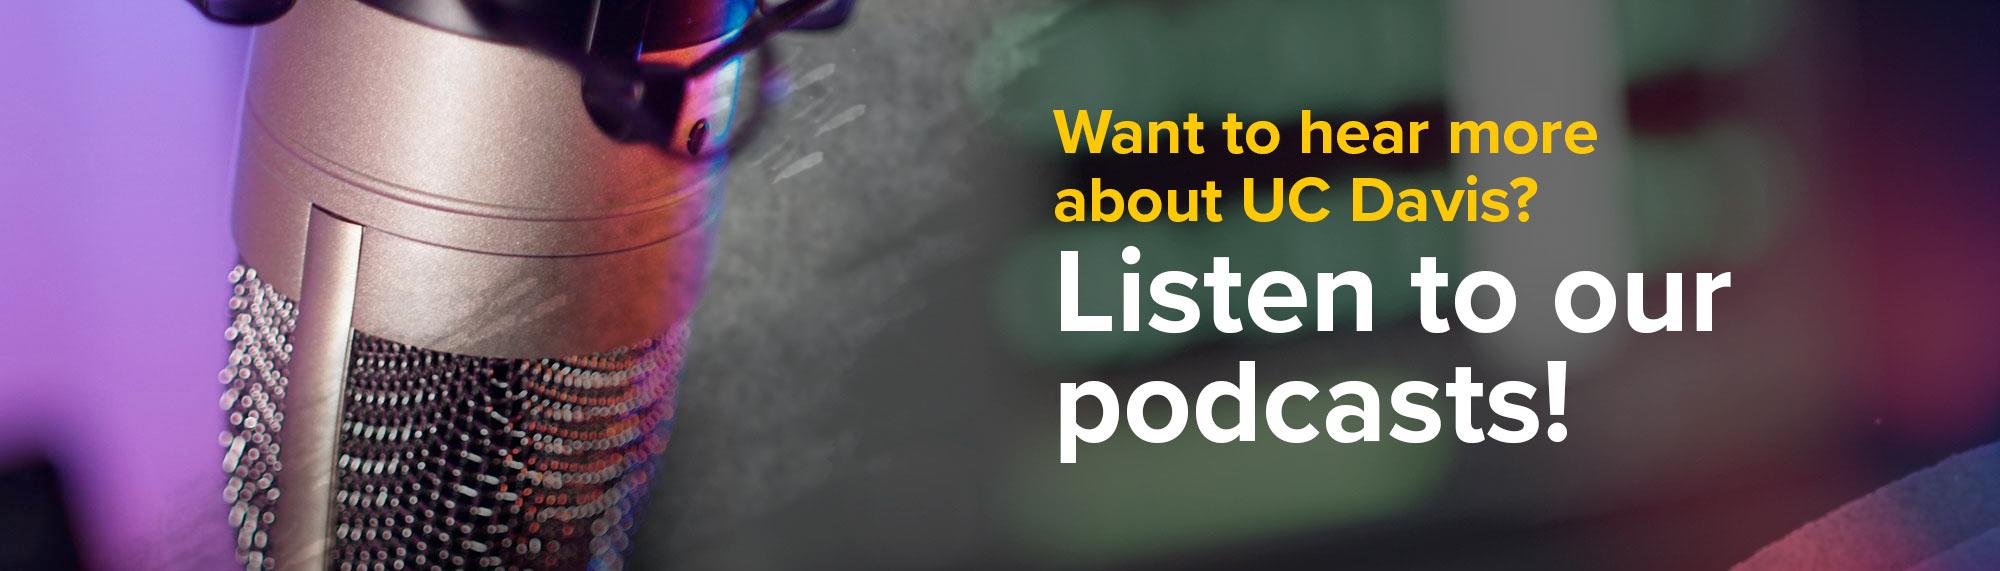 Want to hear more about ֱ? Listen to our podcasts!